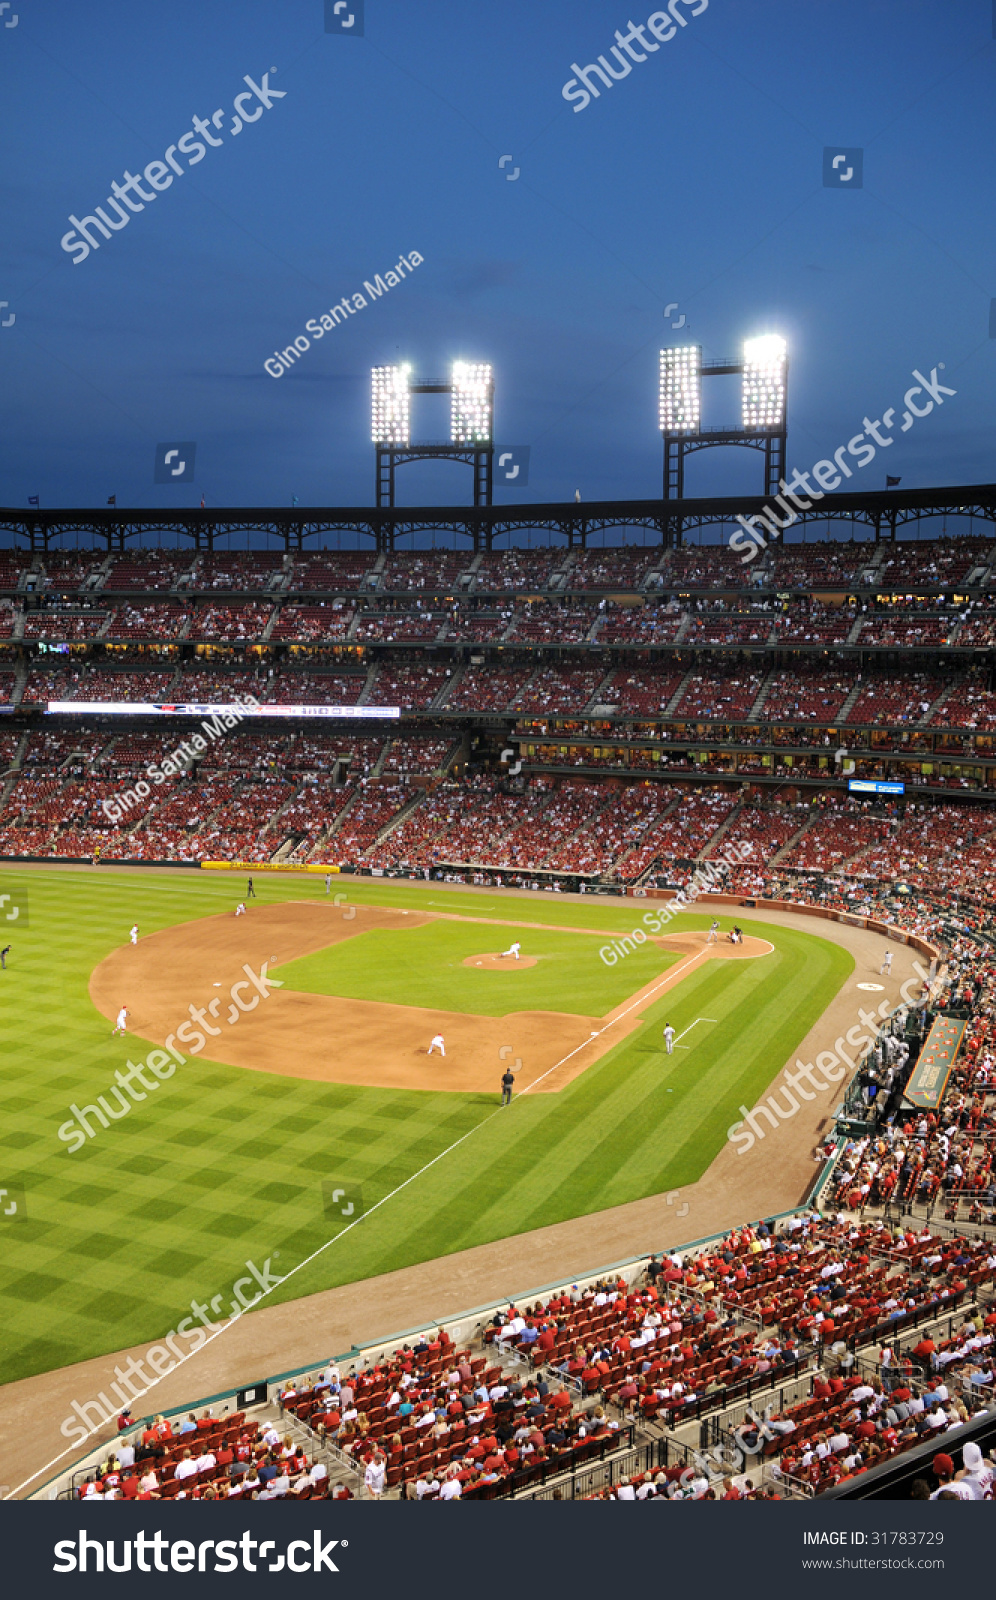 St Louis - June 6: Busch Stadium Home Of The Saint Louis Cardinals And Site Of The 2009 All Star ...